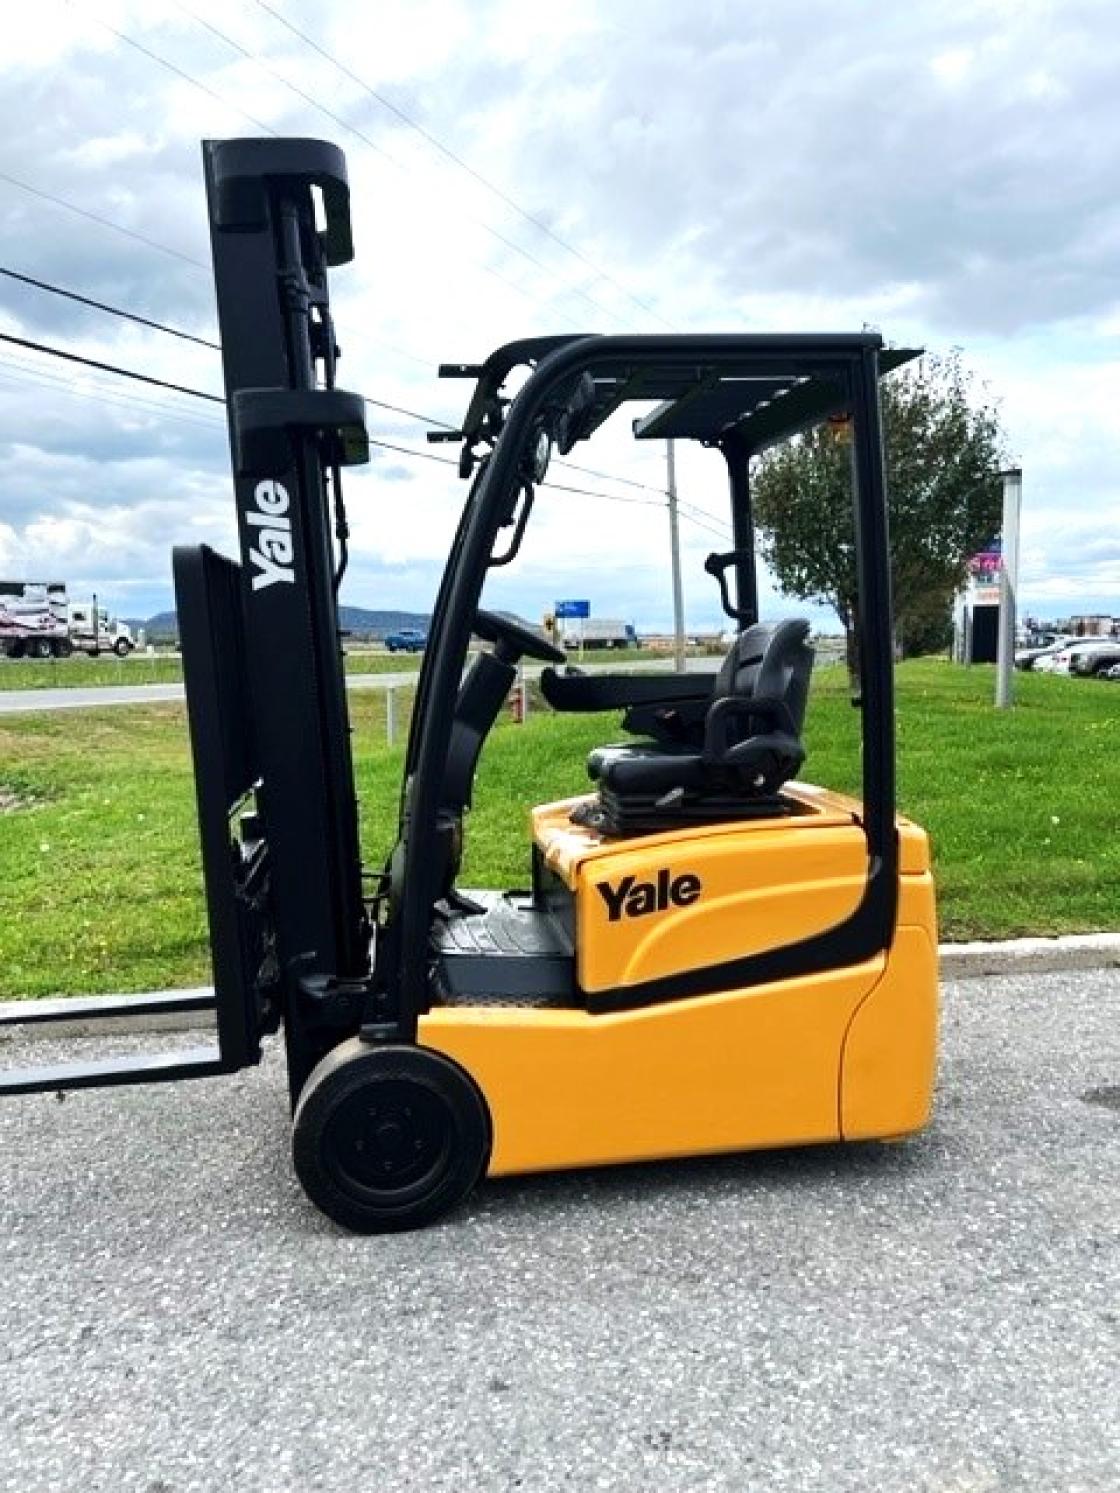 Forklift 3 wheels cushion electric Yale ERP030VT 2020 #12399